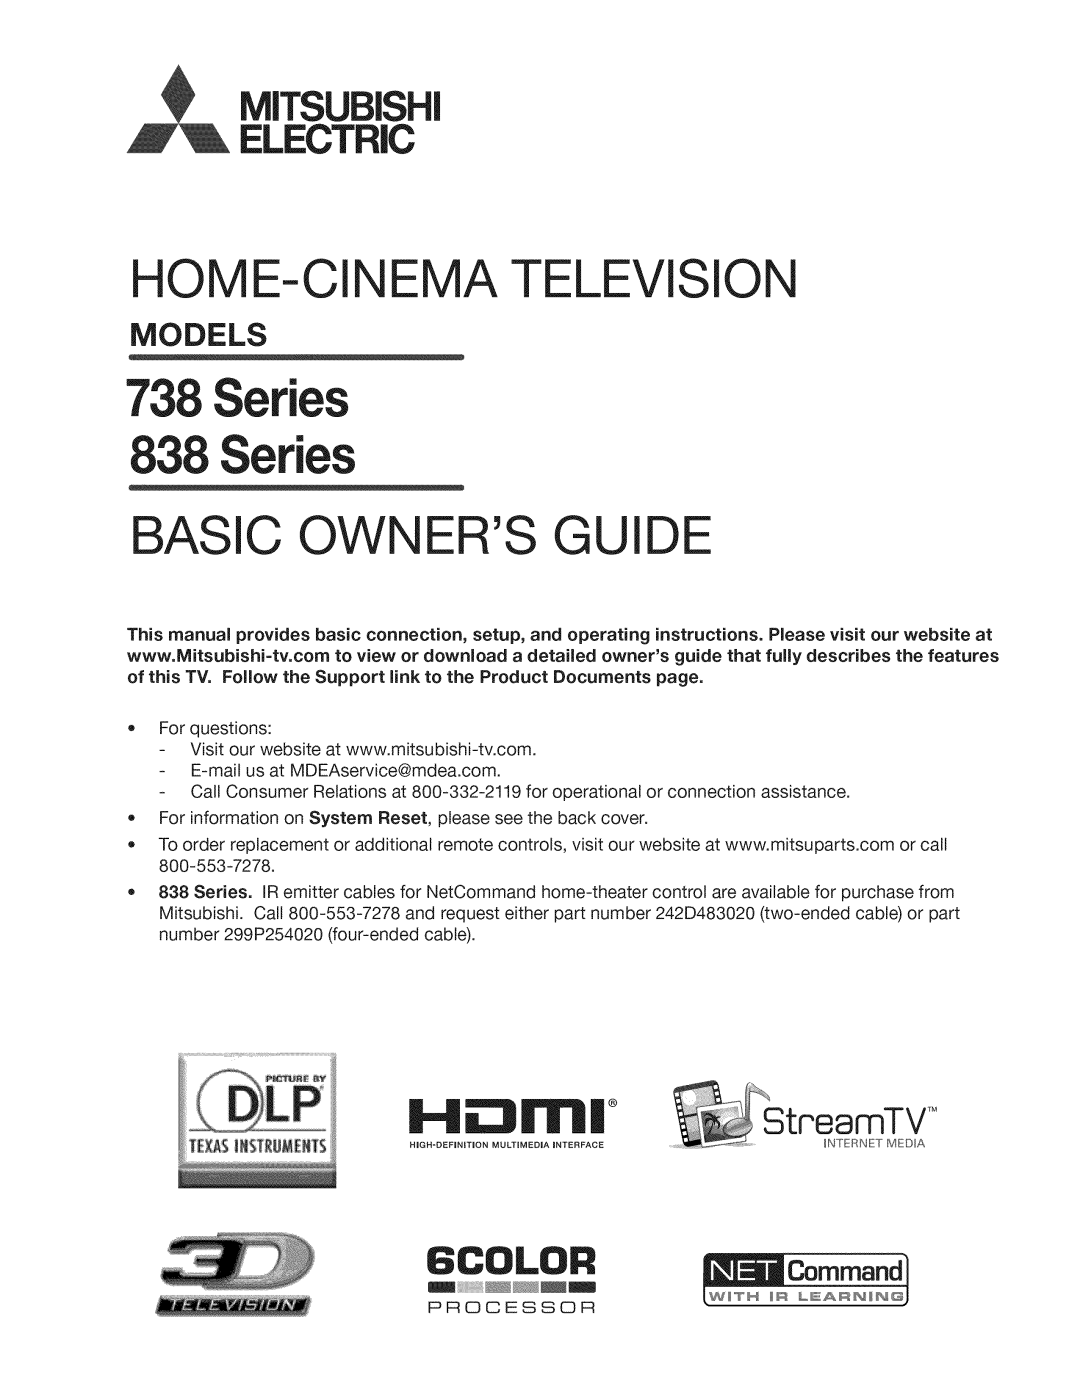 Mitsubishi Electronics 838 manual Home-Cinematelevision, Basic Owners Guide, Models, 738Series Series, H_:::itI_II, 6COLOR 